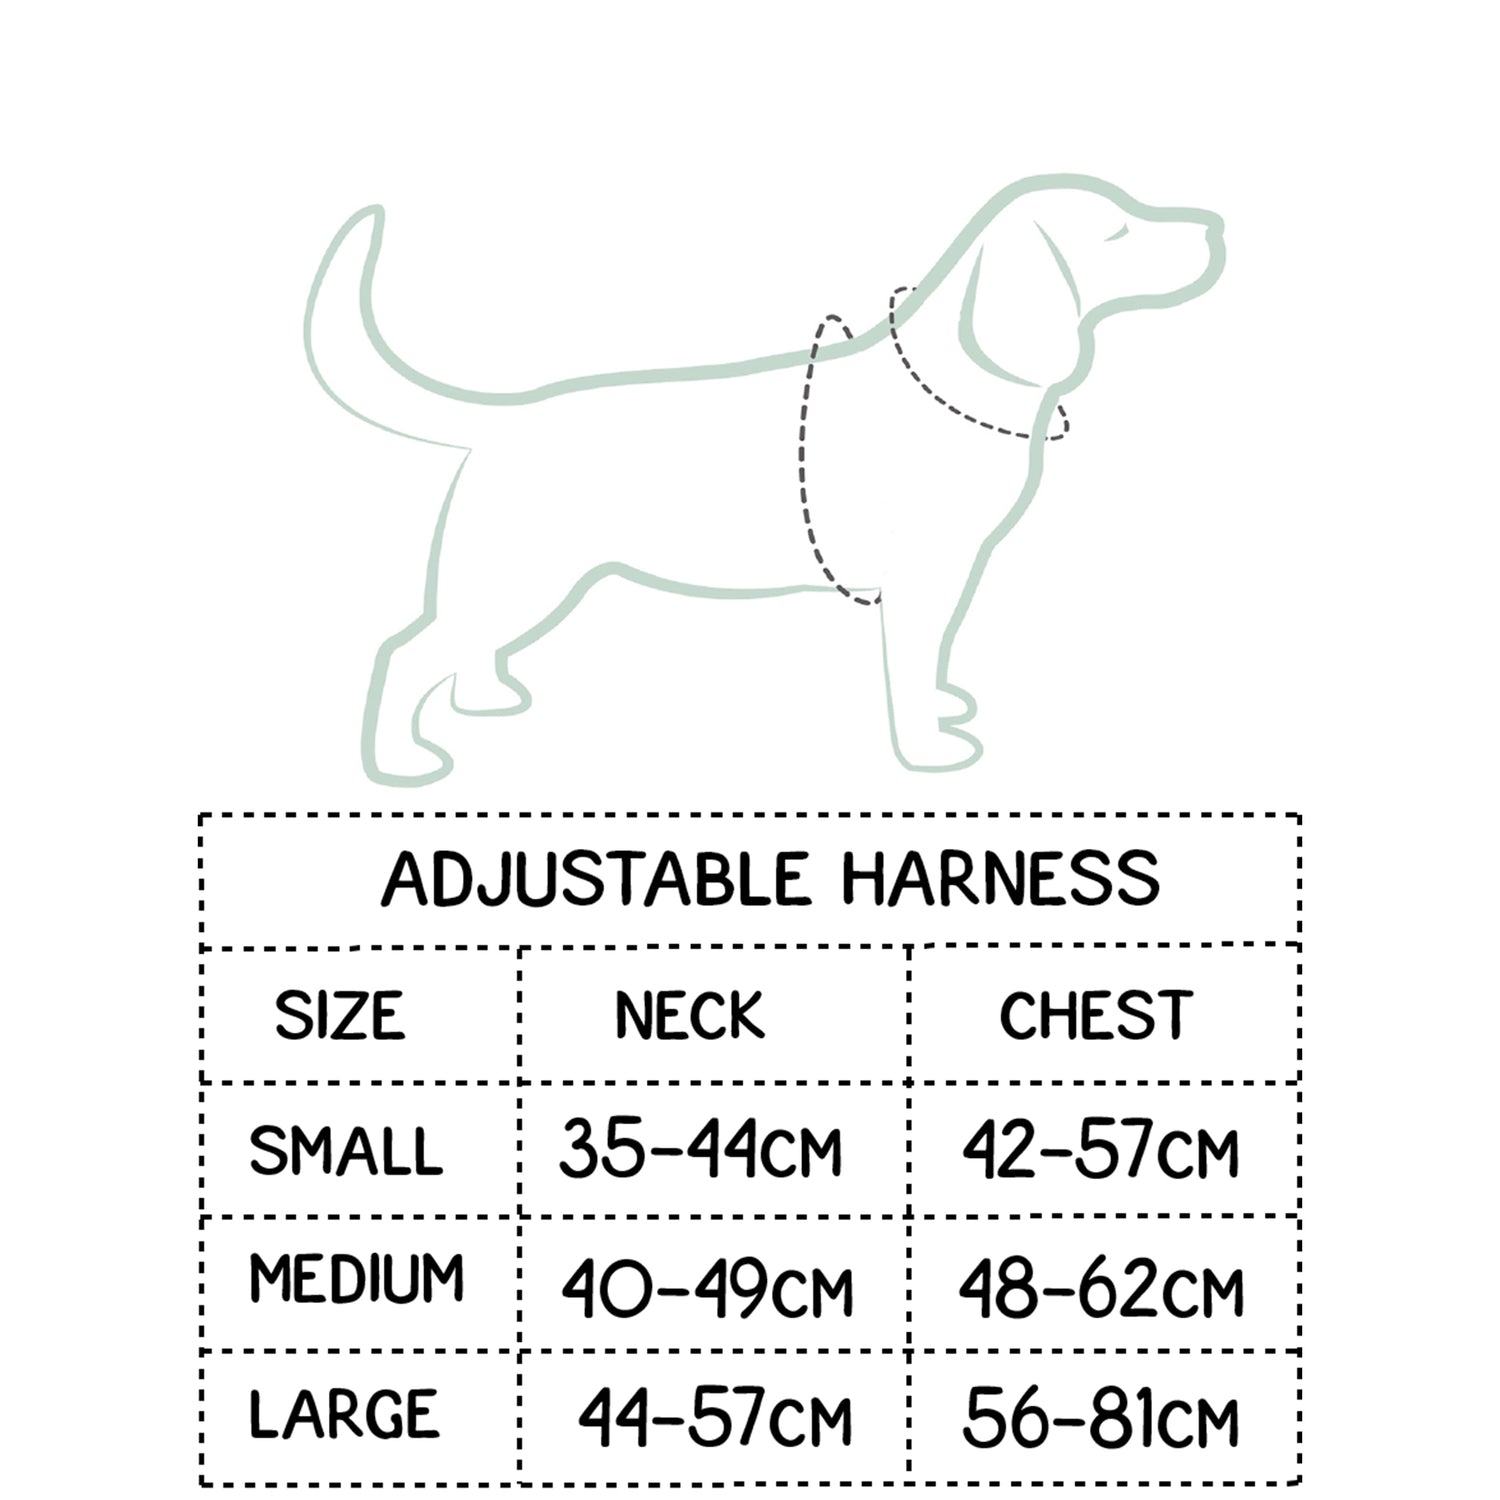 Dog harness sizes guide chart